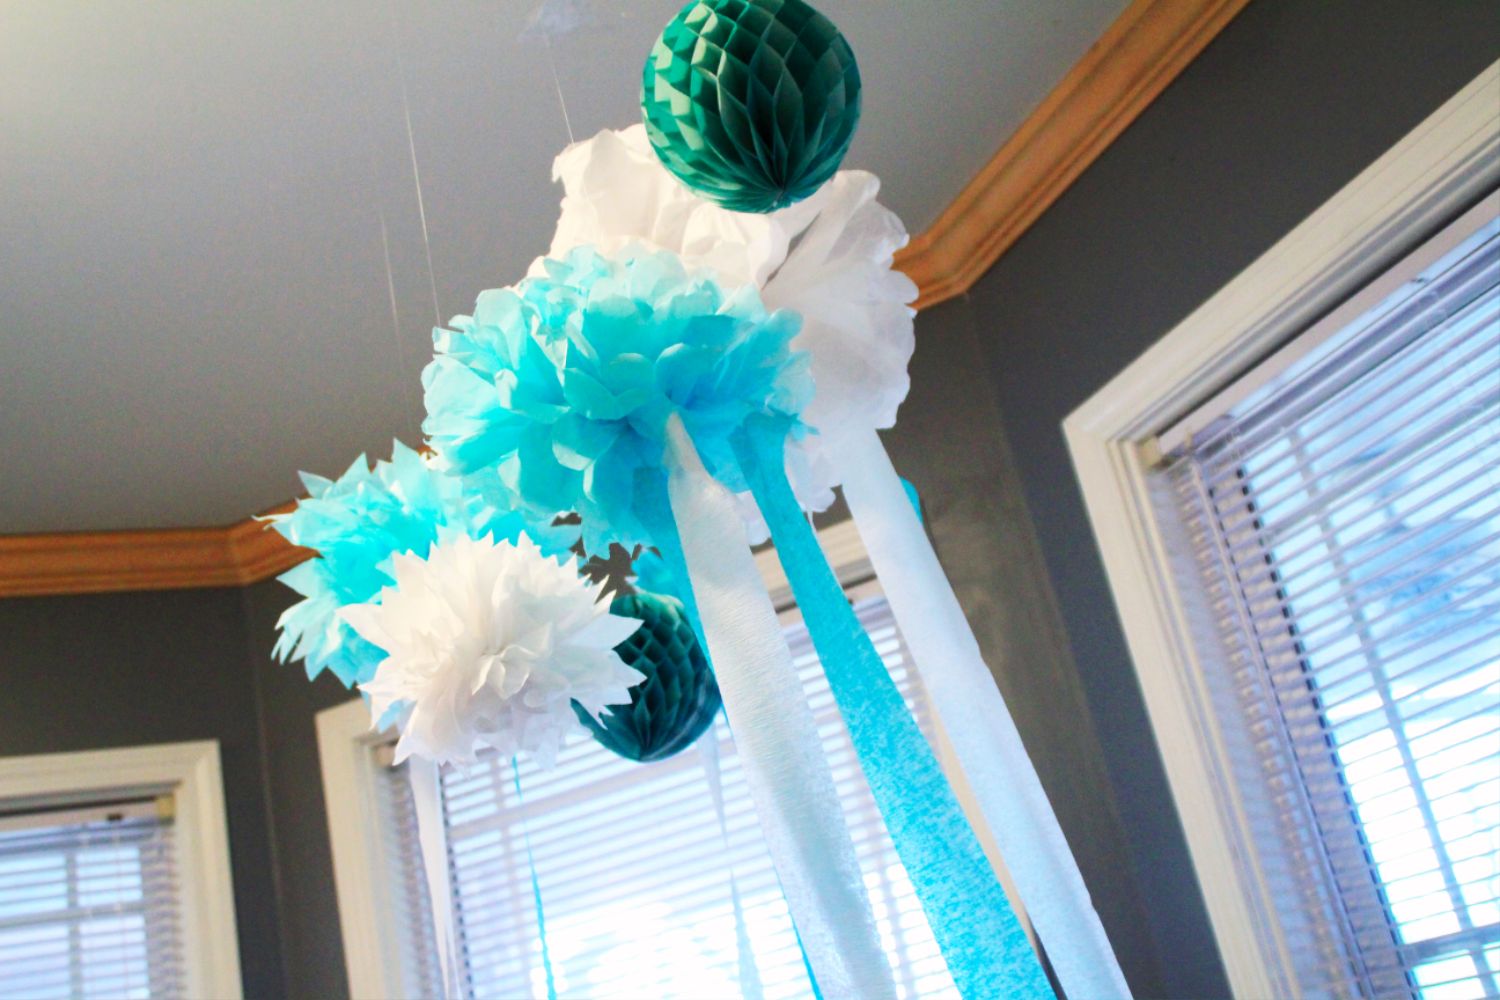 https://www.thesoutherncouture.com/wp-content/uploads/2016/04/Baby-Shower-Decoration-Ideas-9.jpg